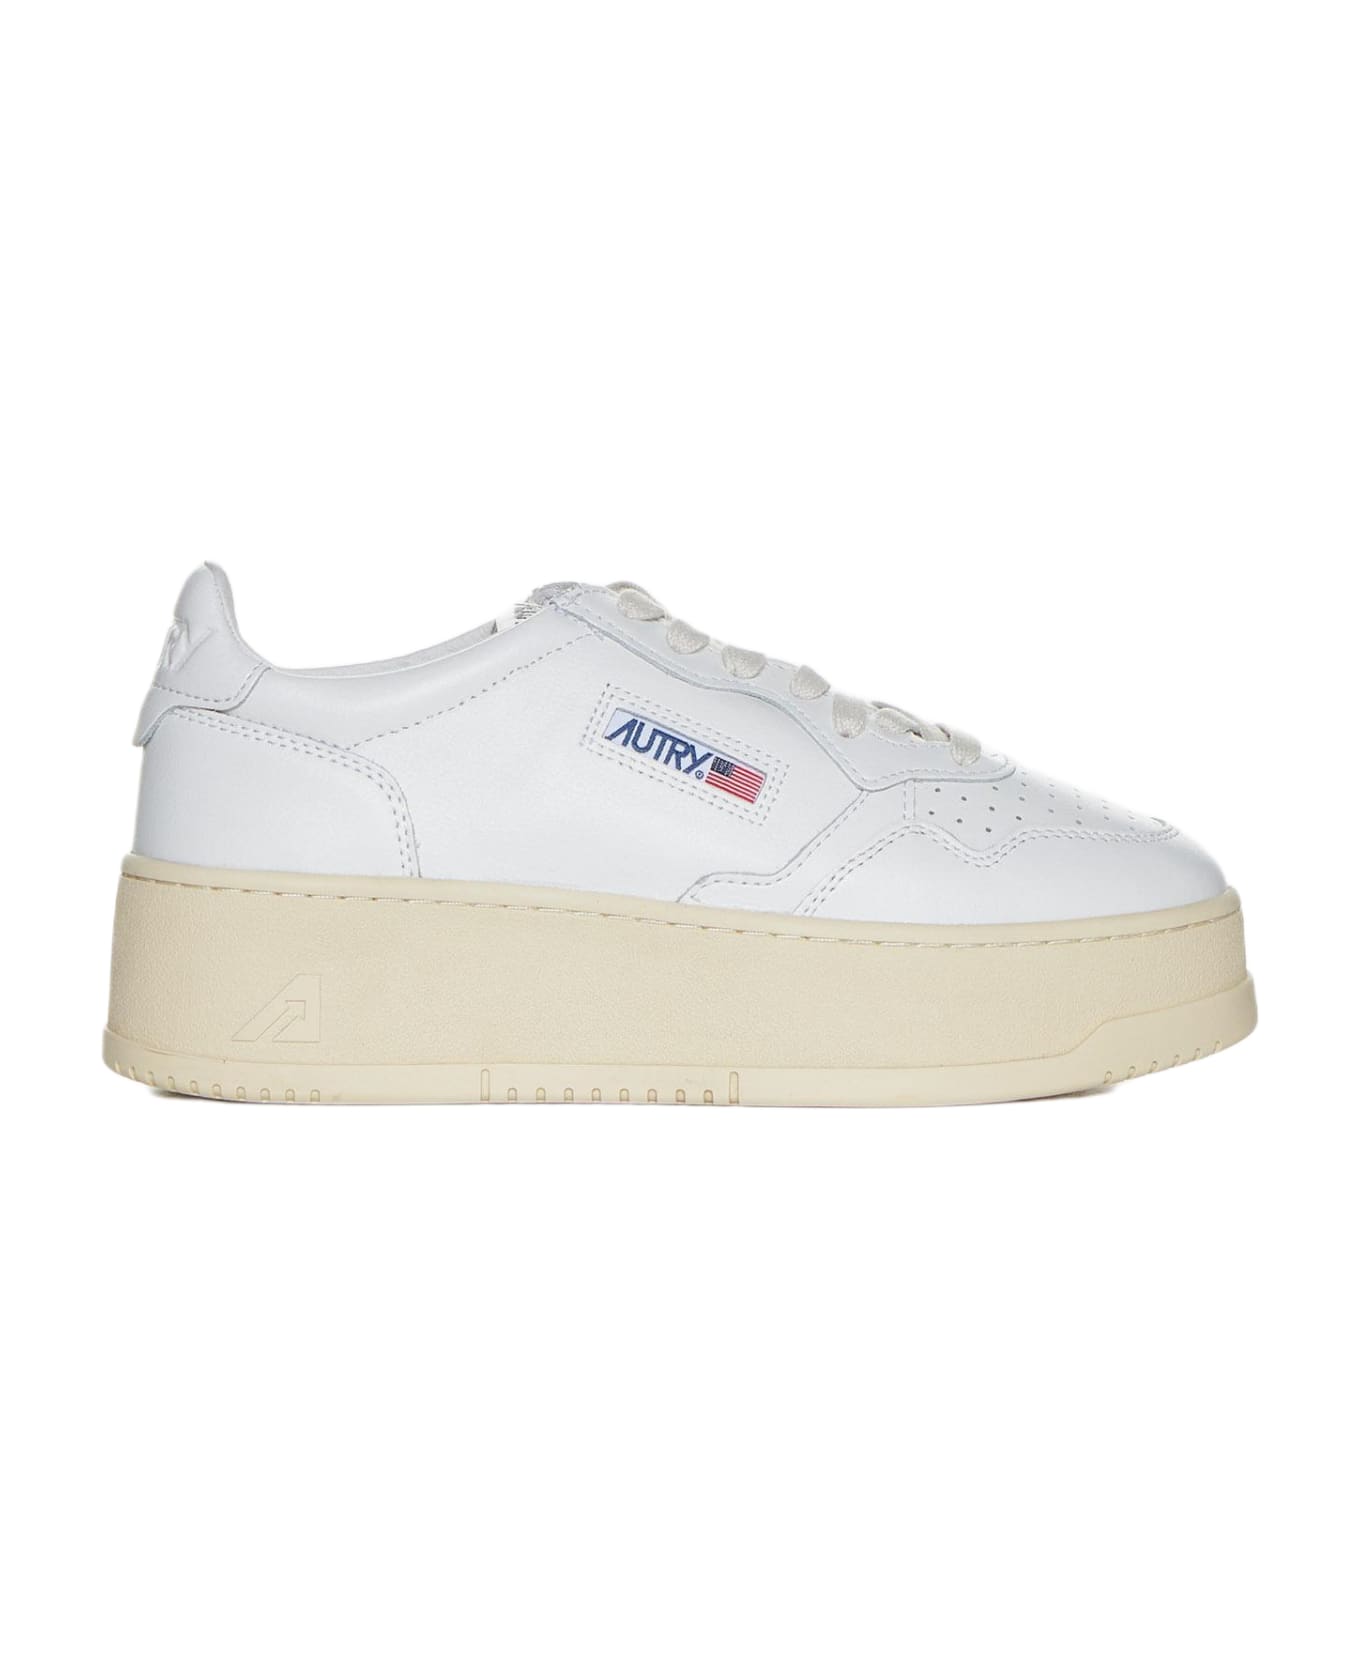 Autry Medalist Platform Leather Sneakers - White